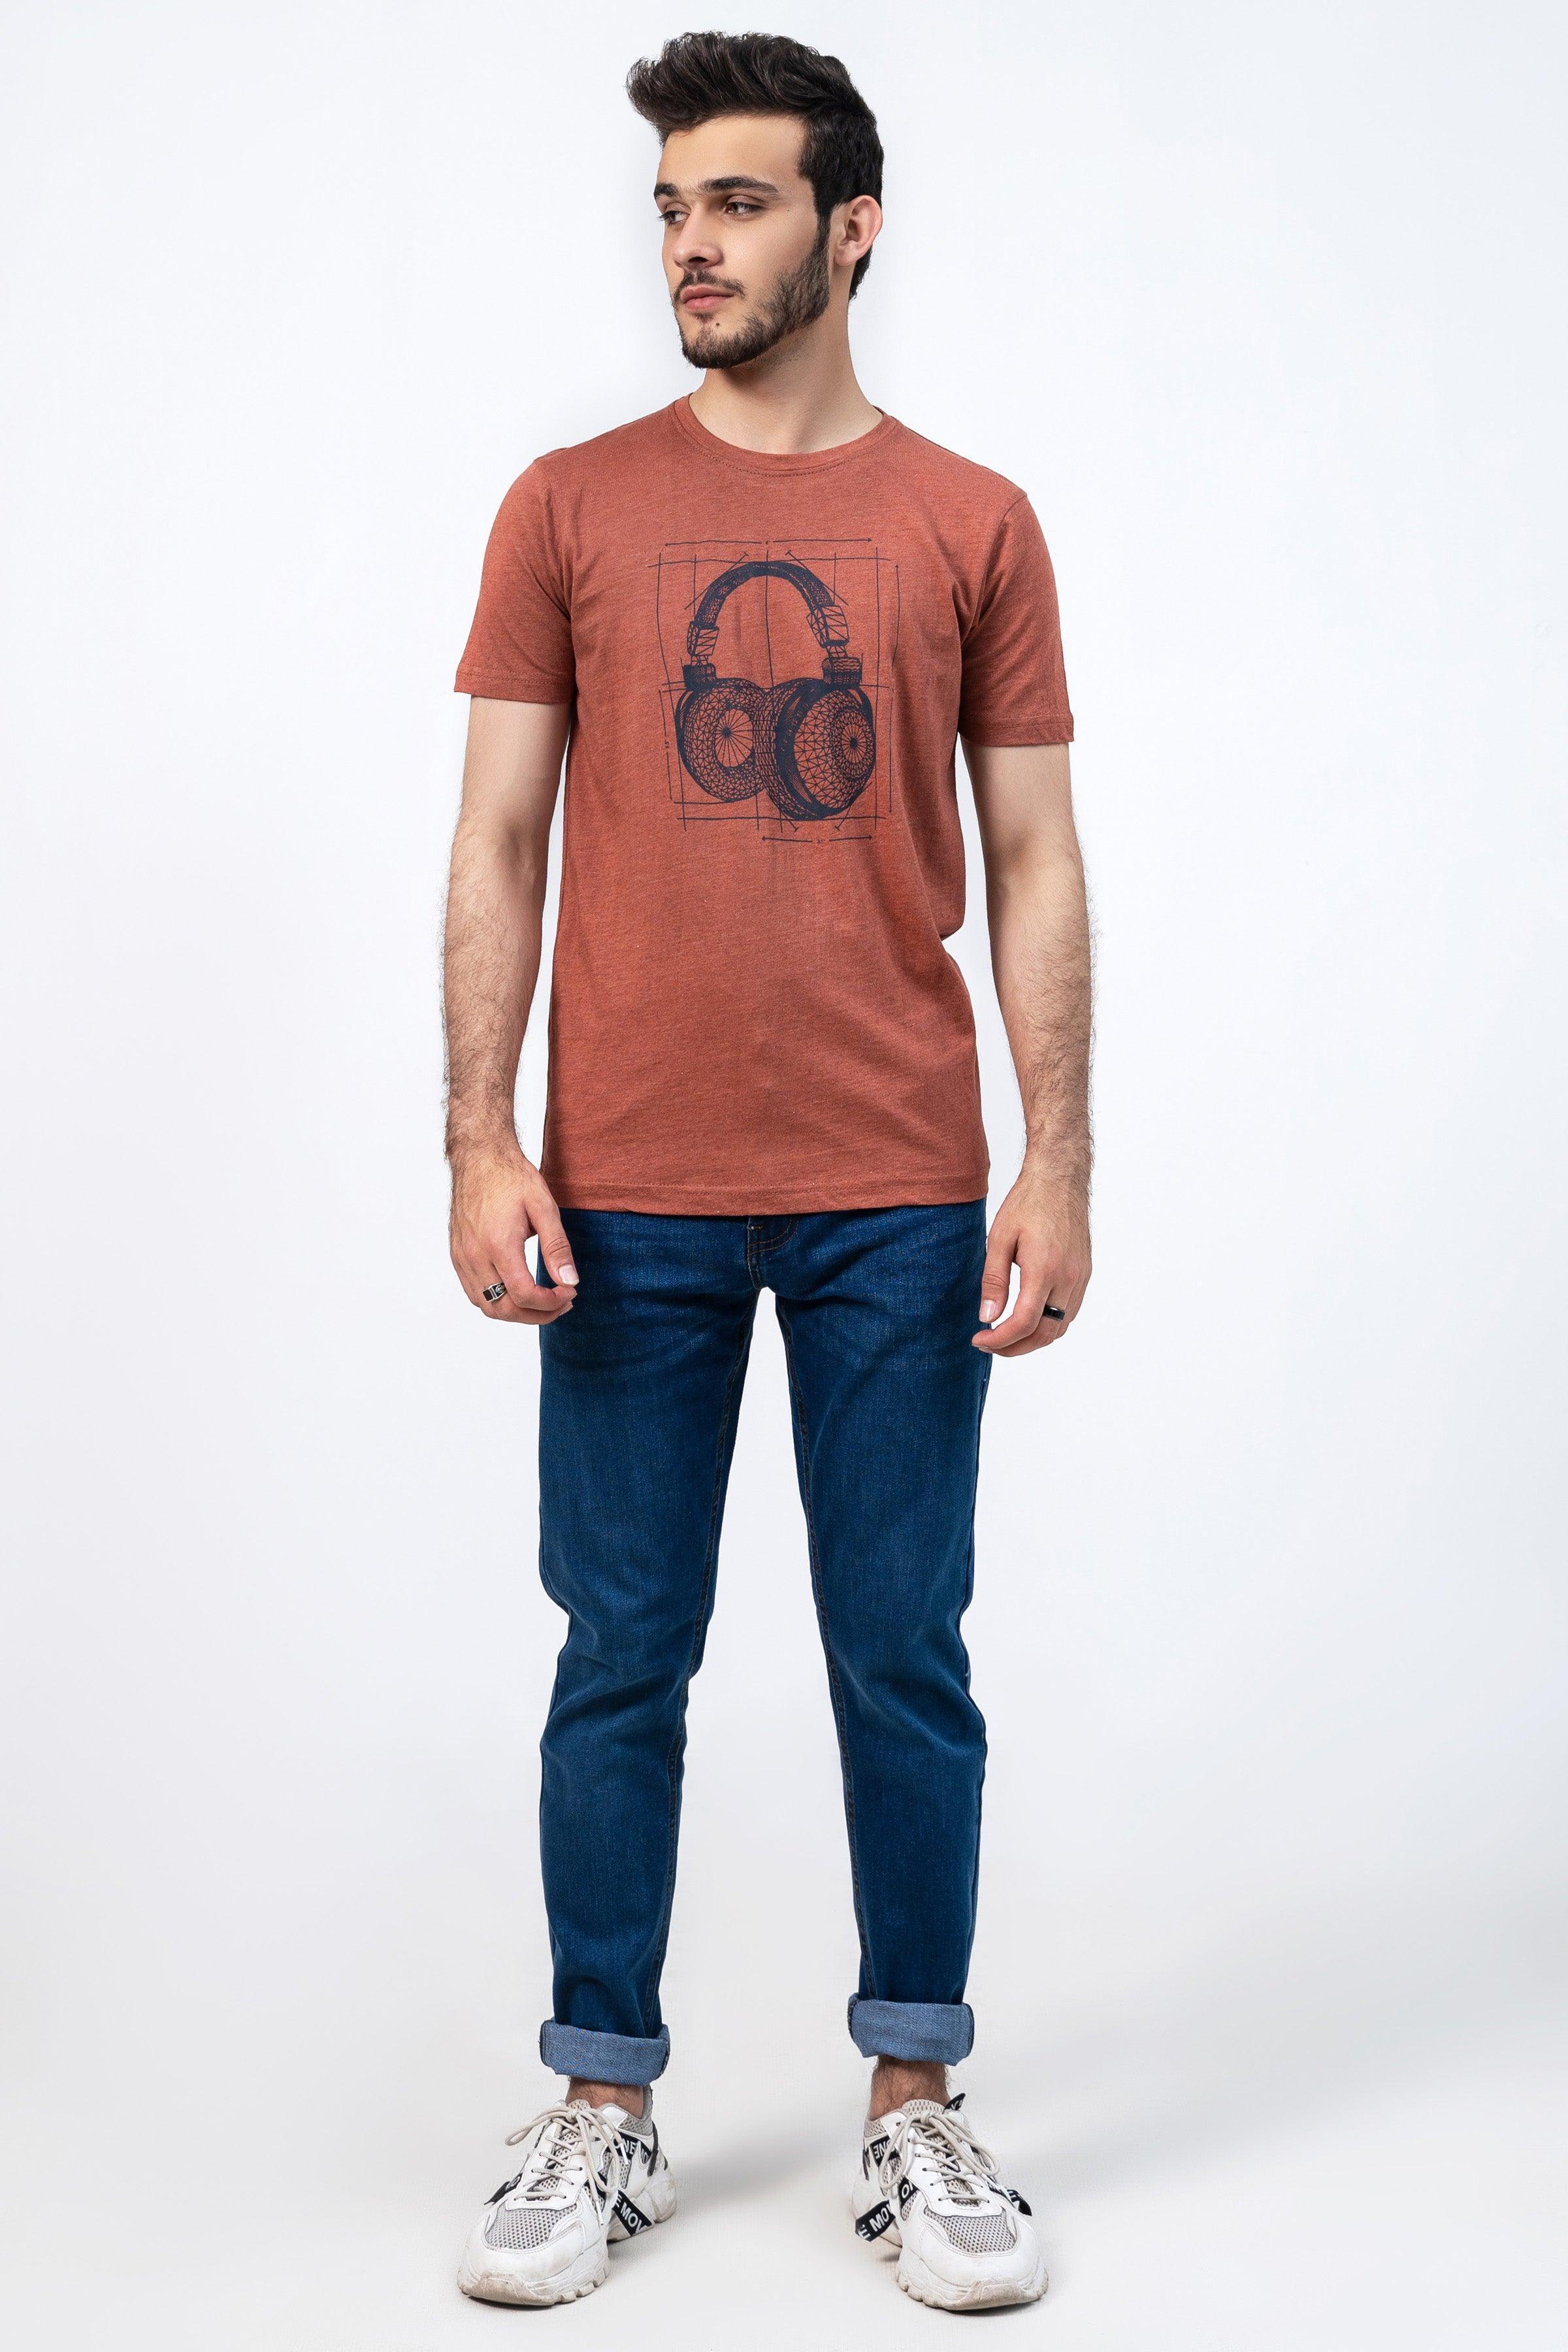 MUSIC GRAPHIC T SHIRT RUST at Charcoal Clothing